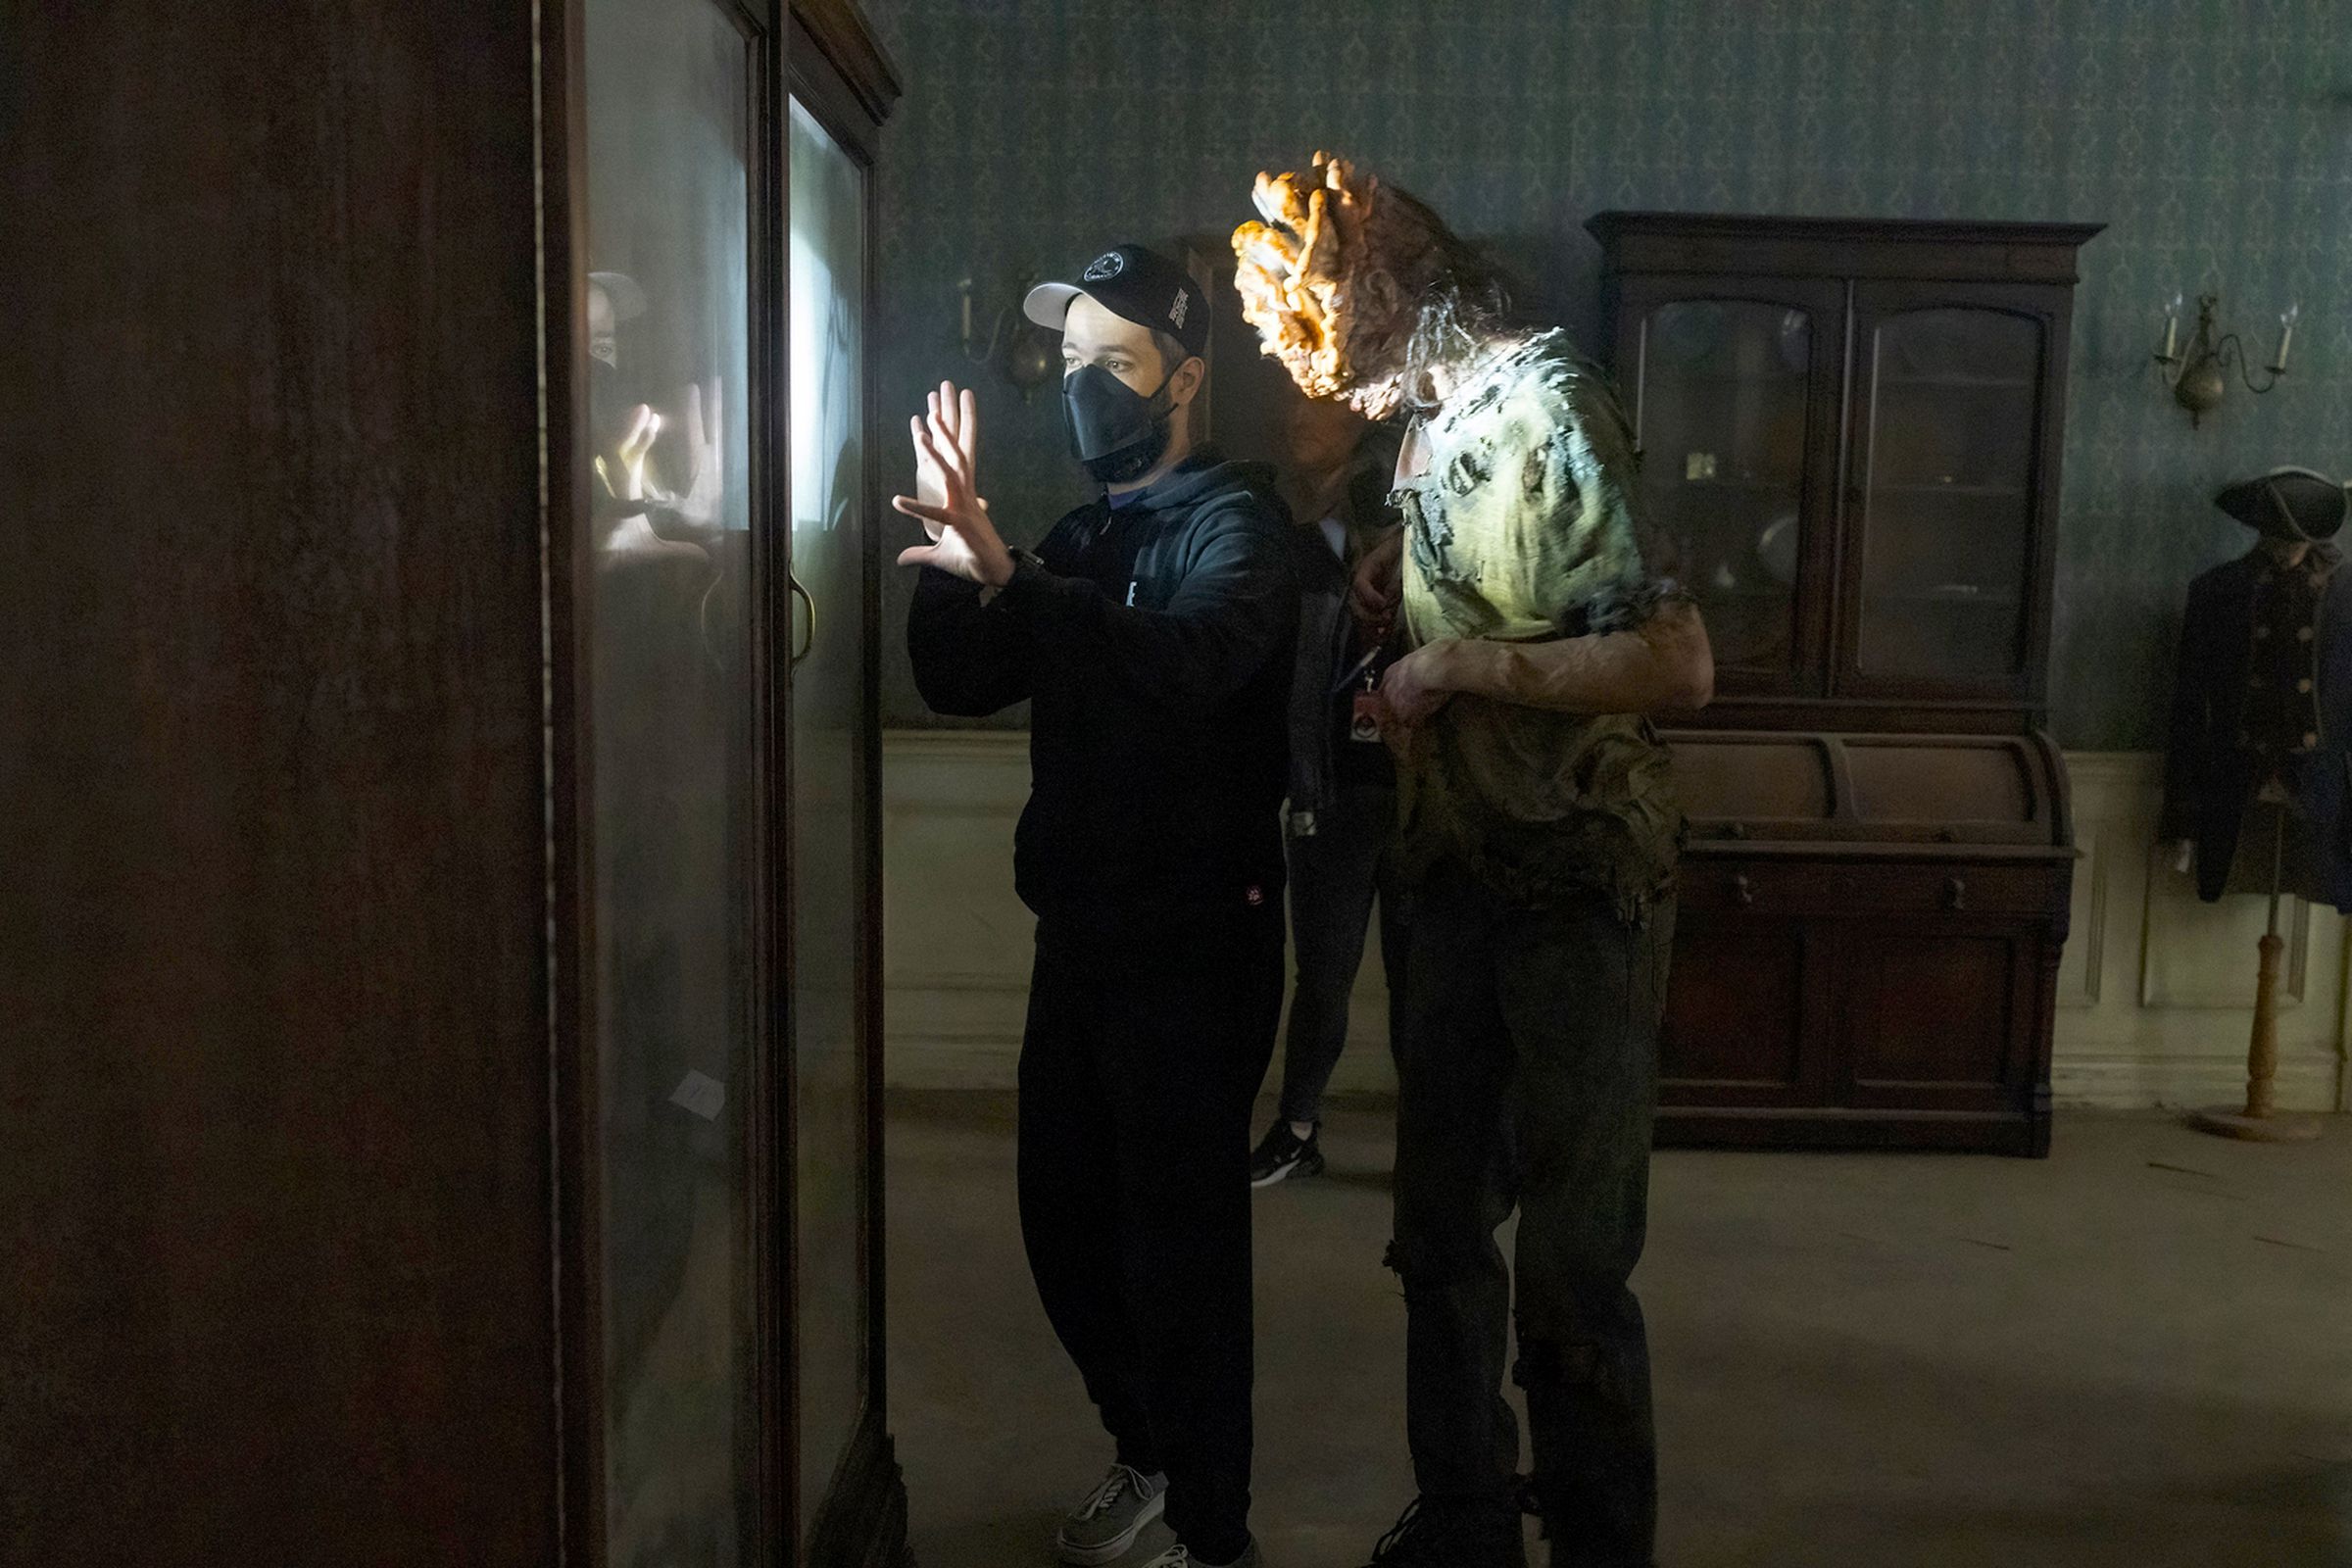 Two men on a film set standing in front of a display case. Closest to the case is a man in a black hoodie, jeans, a baseball cap, and a black mask as he gestures towards something while giving the other man. The second man, standing just behind the first is wearing a mottled pair of pants, a shirt, and a face full of prosthetics to make it look like his head has been colonized by an aggressive fungal growth.